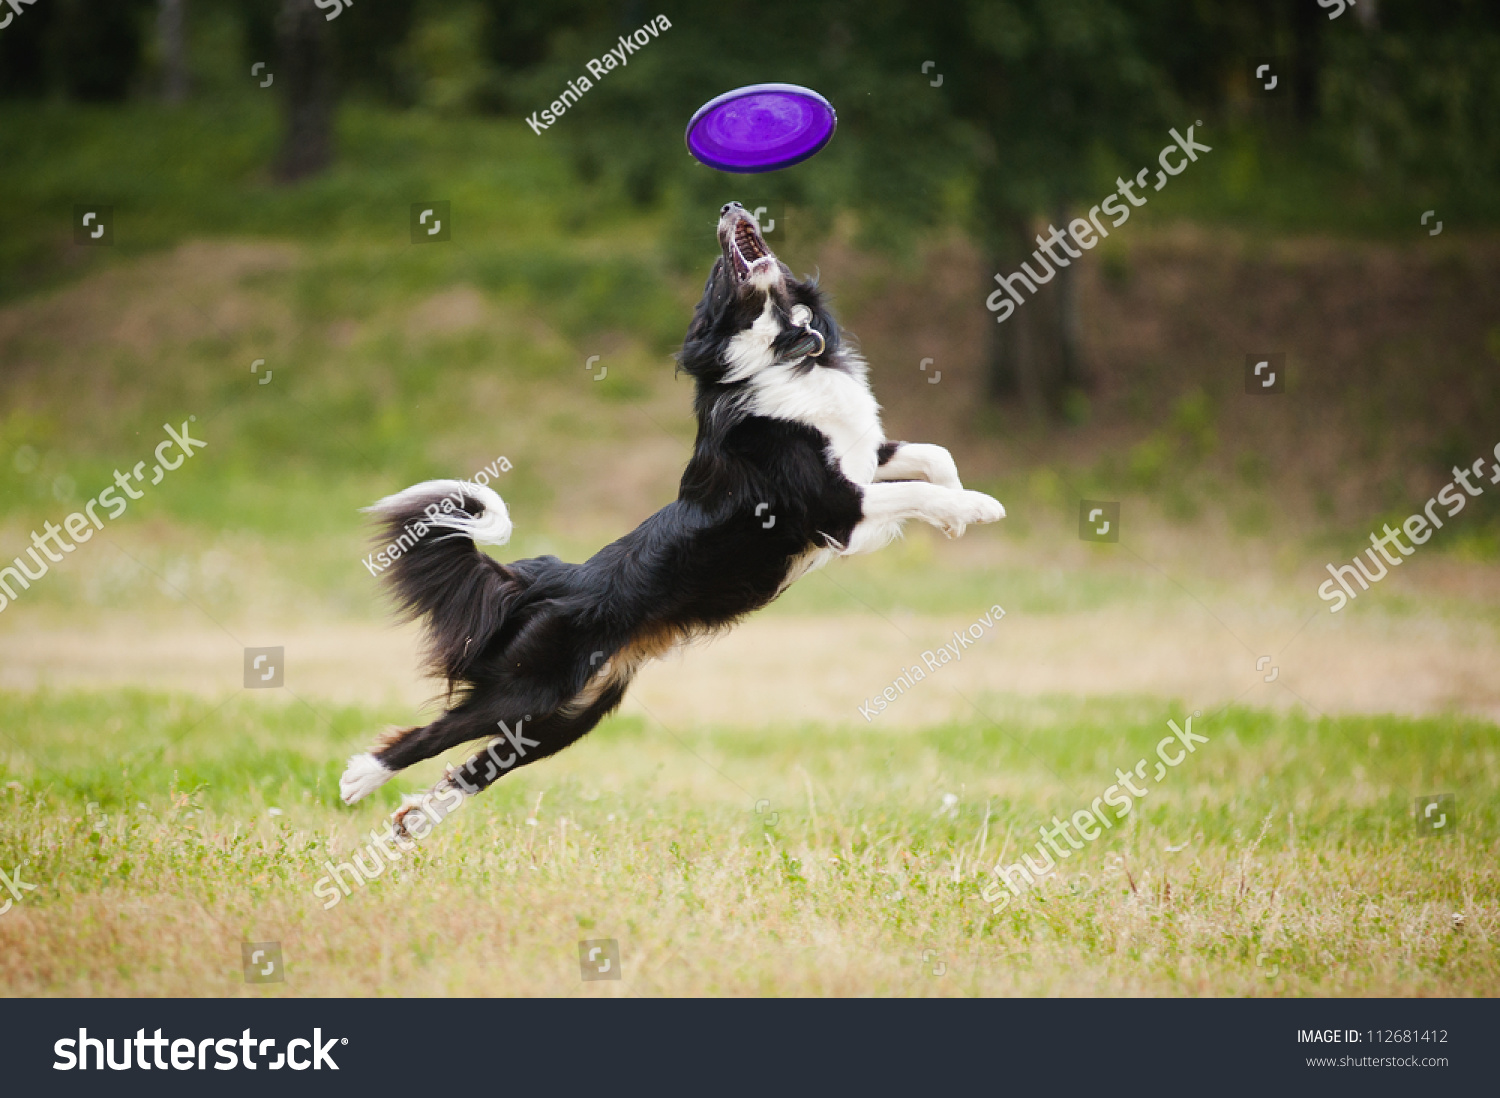 black and white dog catching disc in jump #112681412